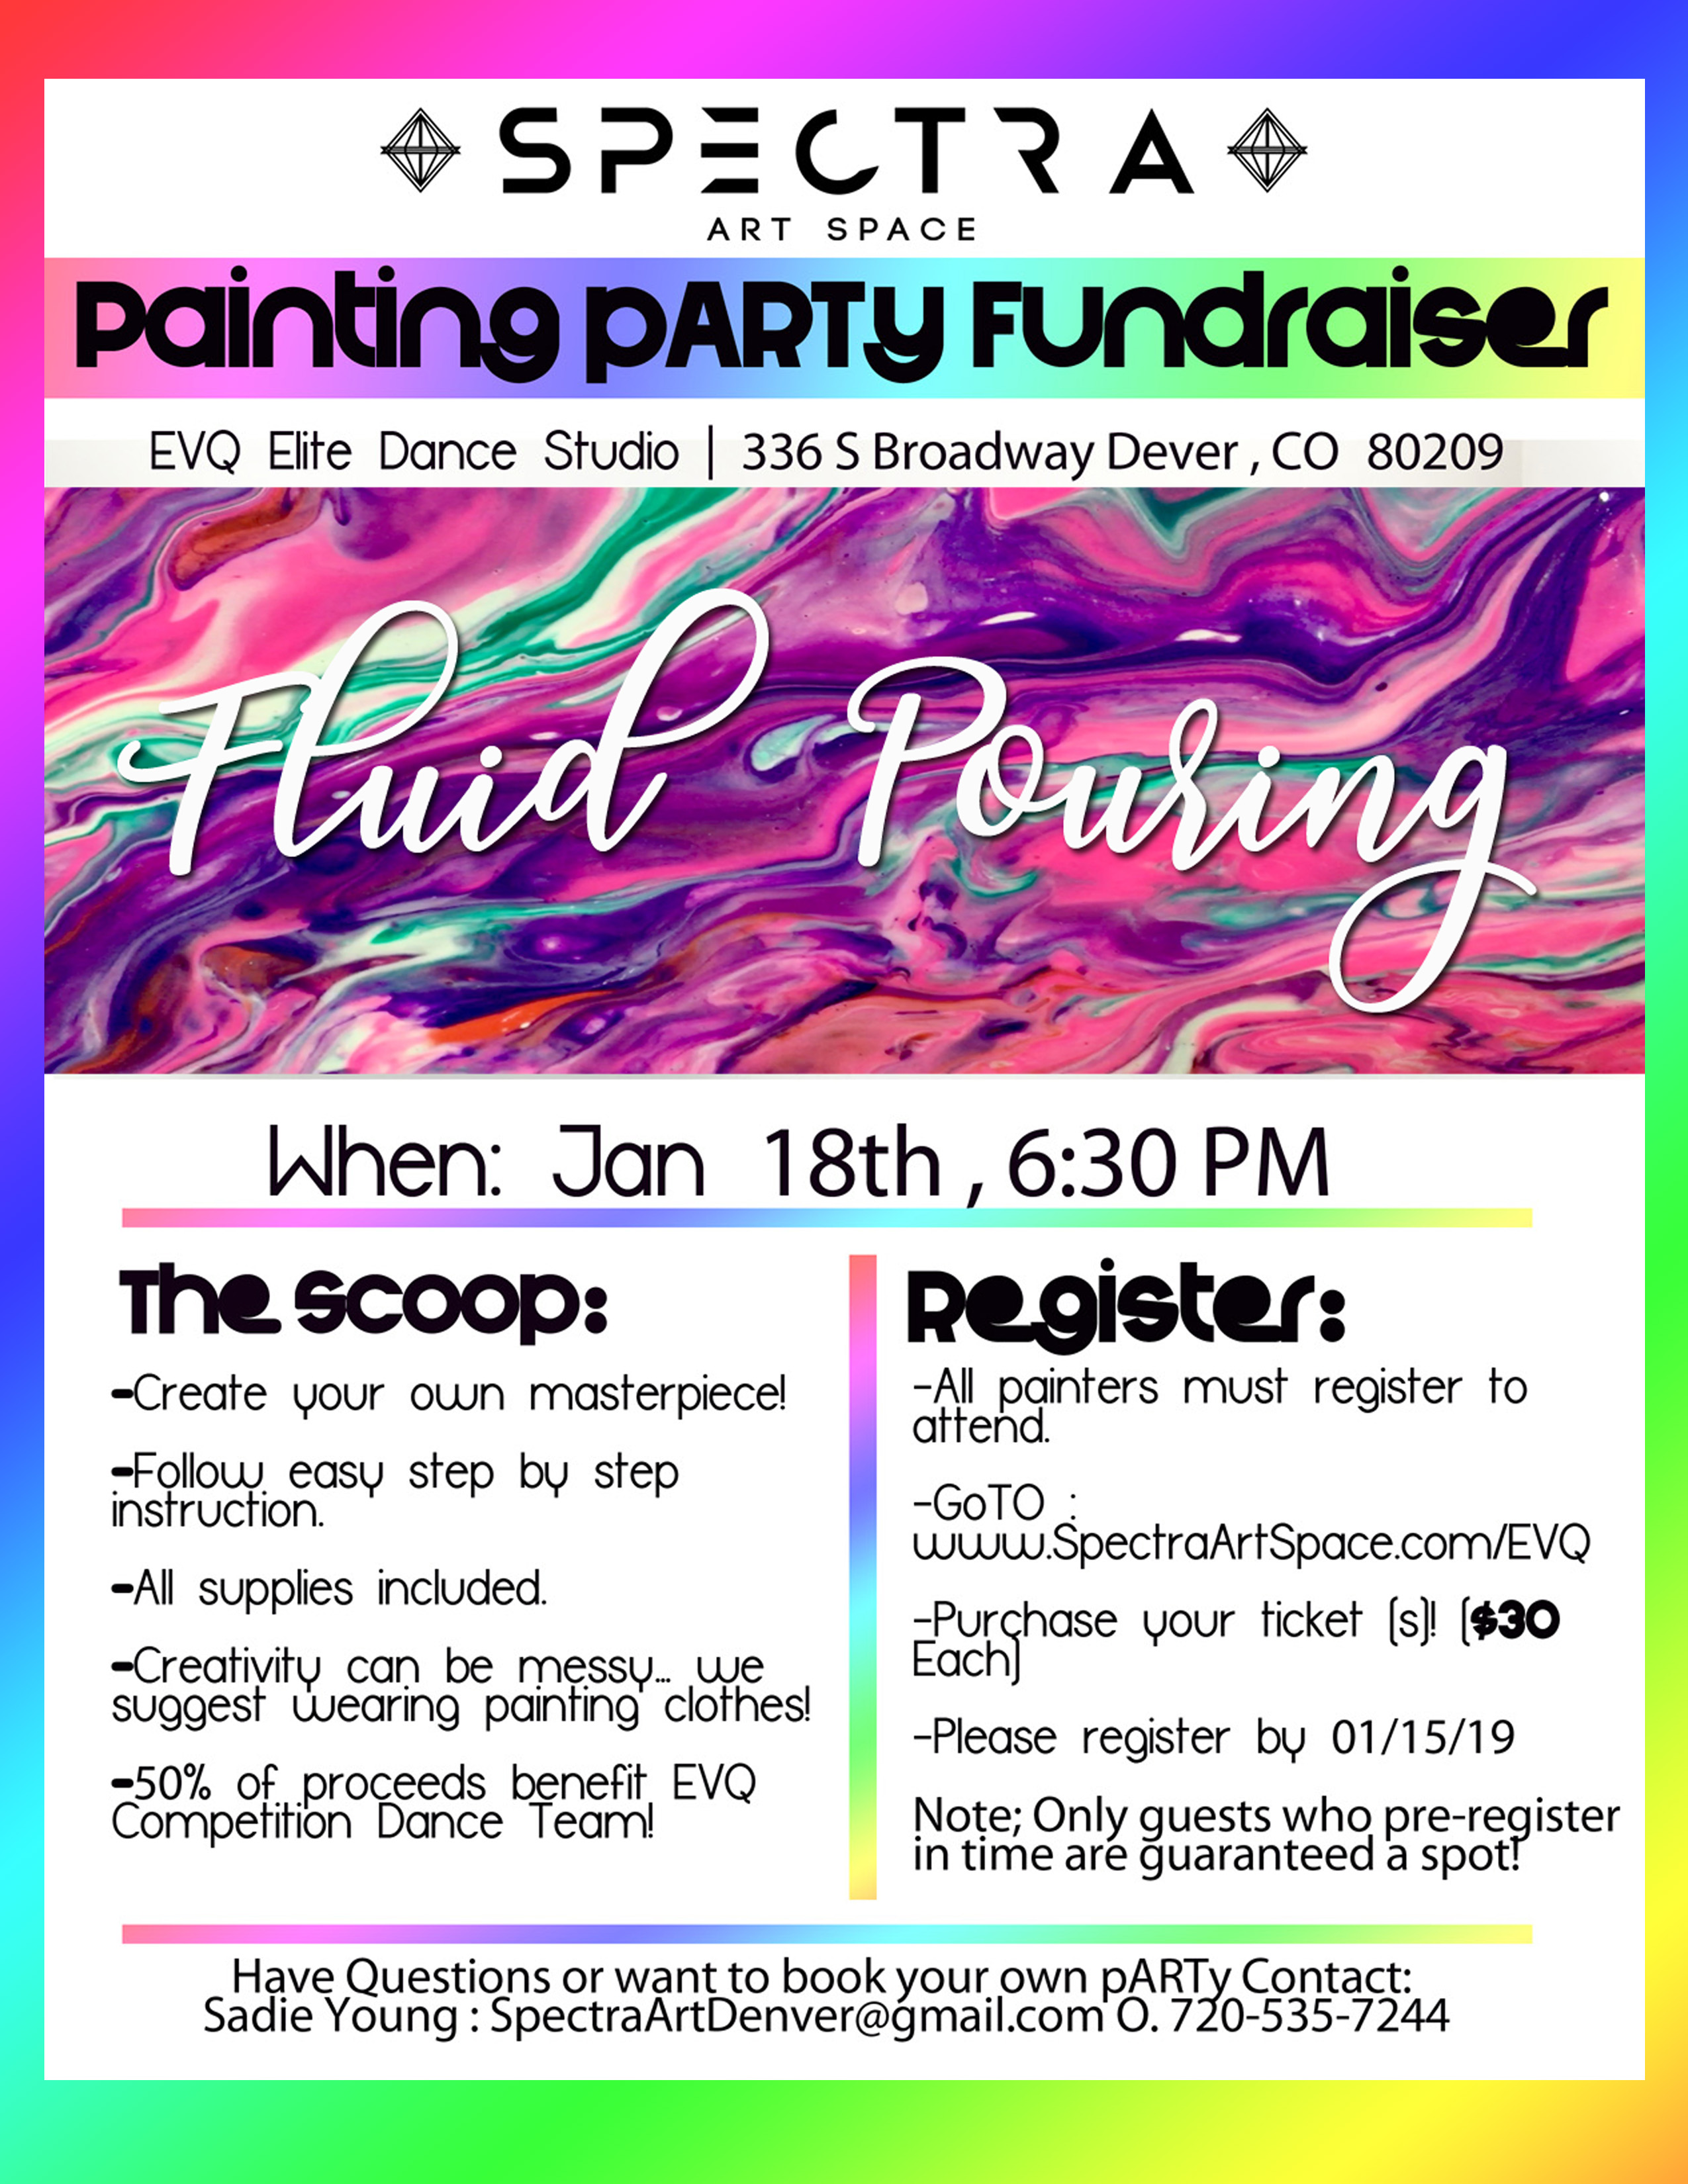 Painting pARTy Fundraiser for EVQ Dance Studio.